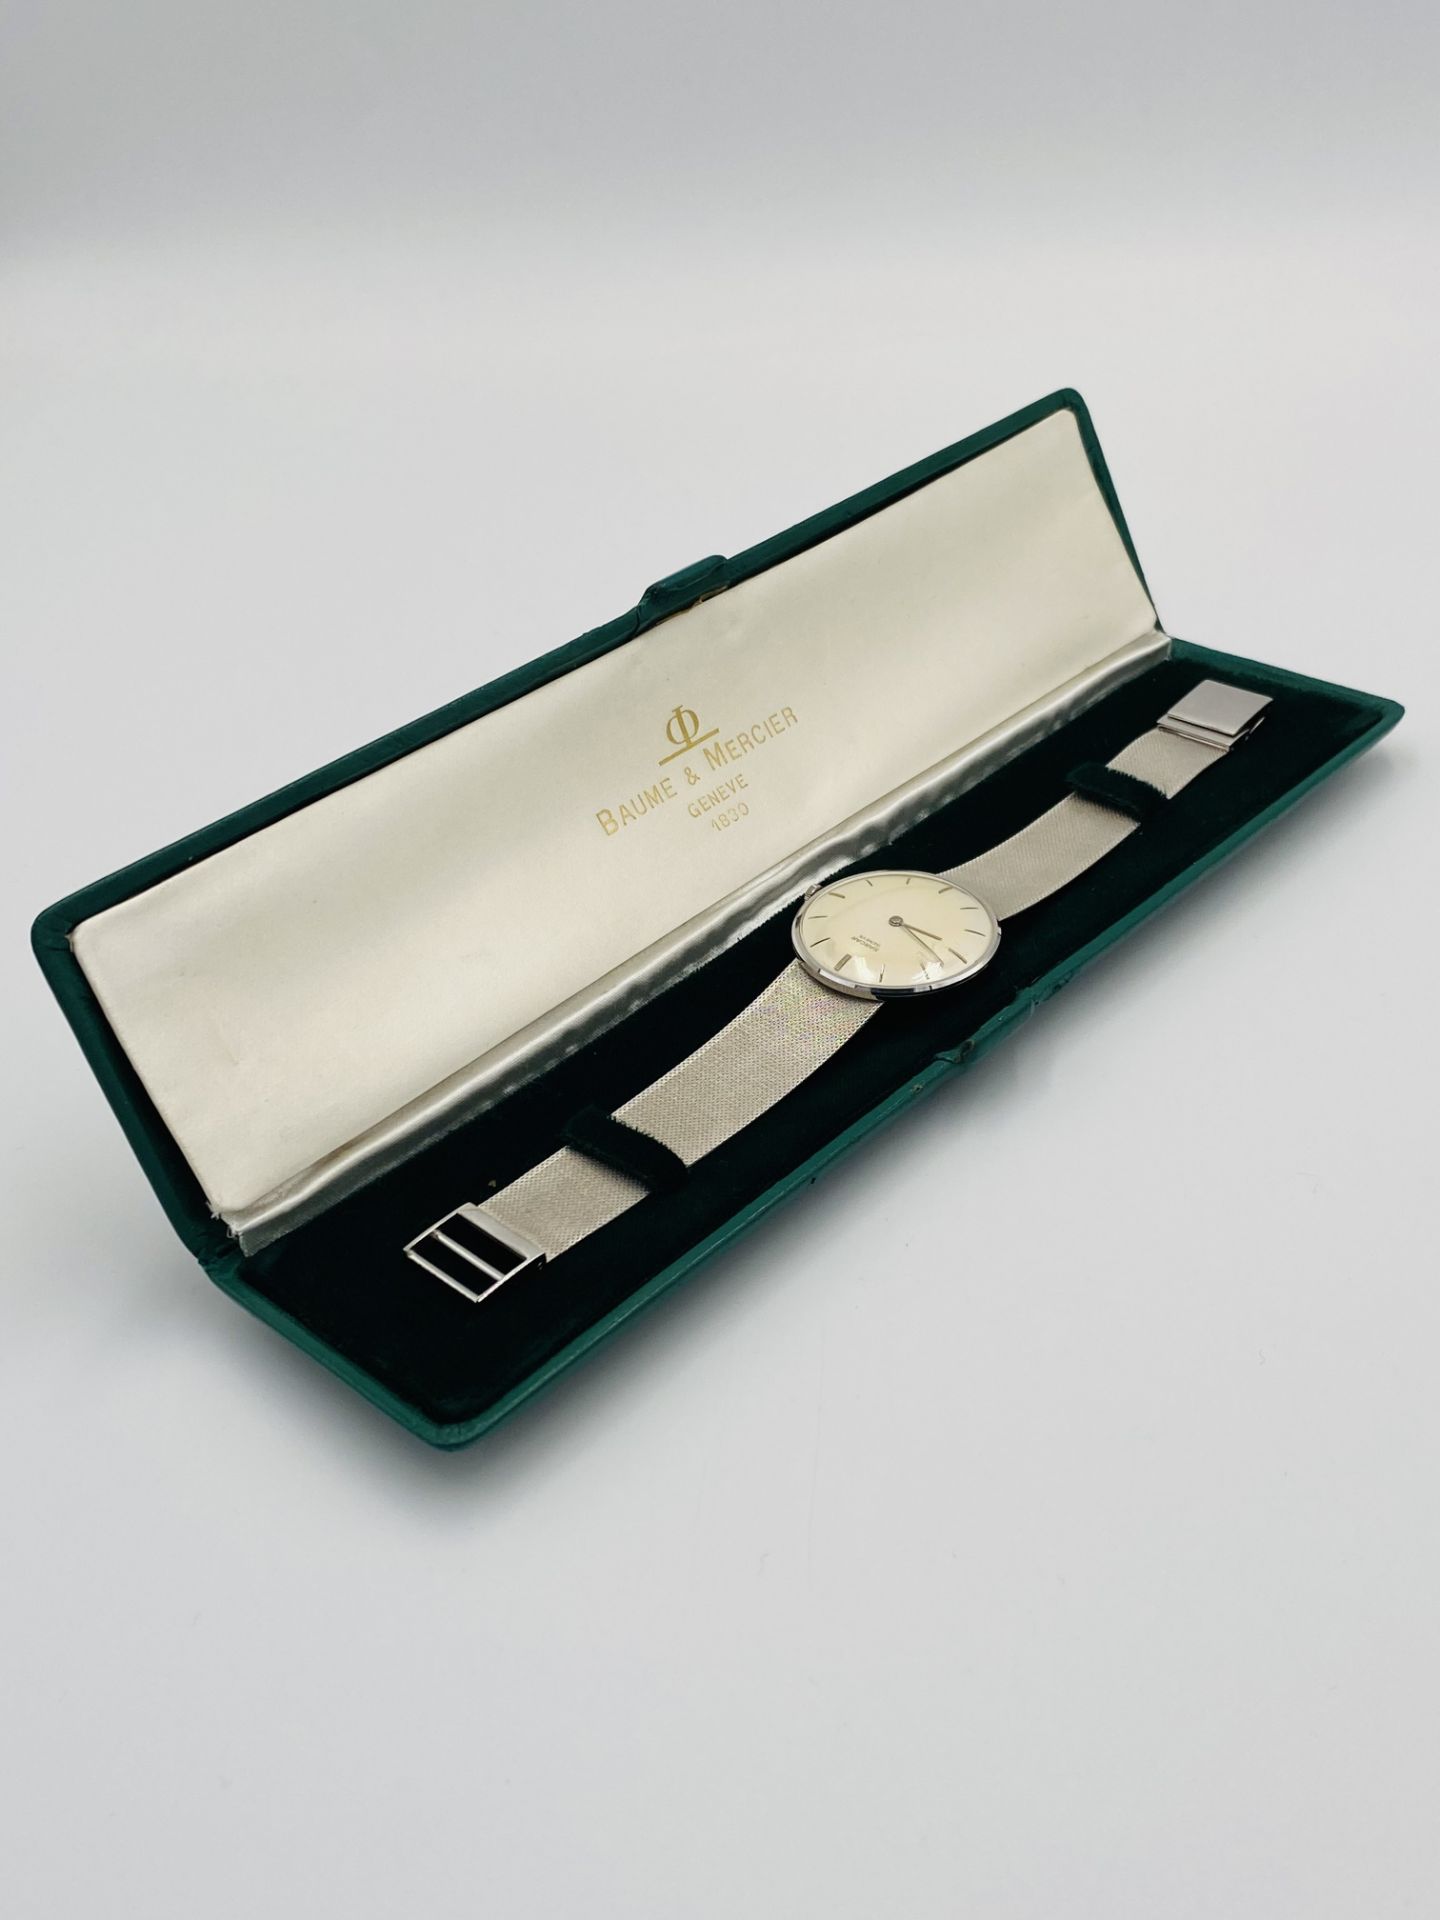 Sarcar Geneve wristwatch with 18ct gold strap - Image 6 of 7